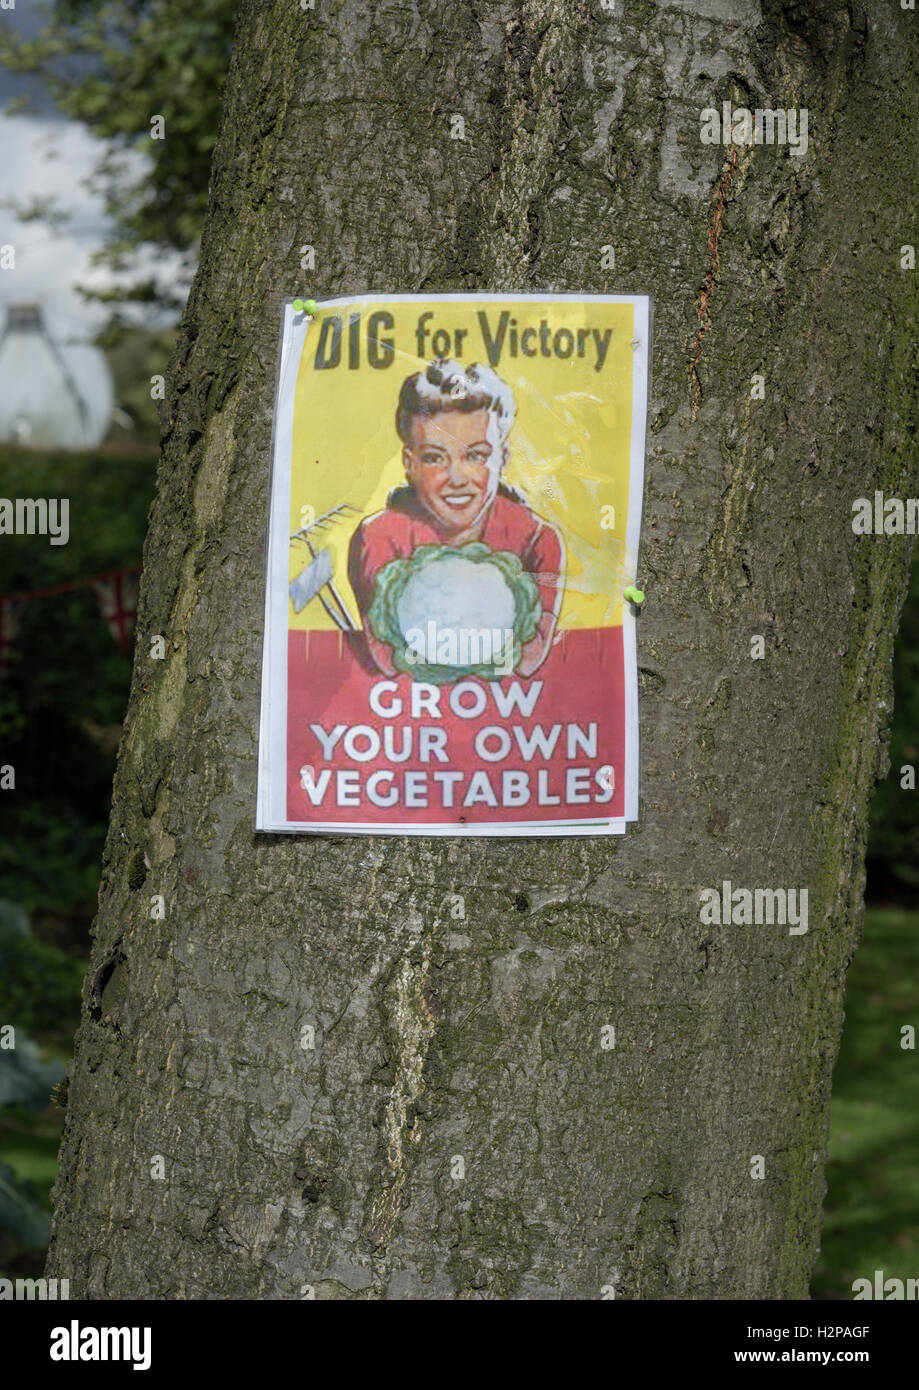 Dig for victory poster on tree in ramsbottom lancashire uk Stock Photo